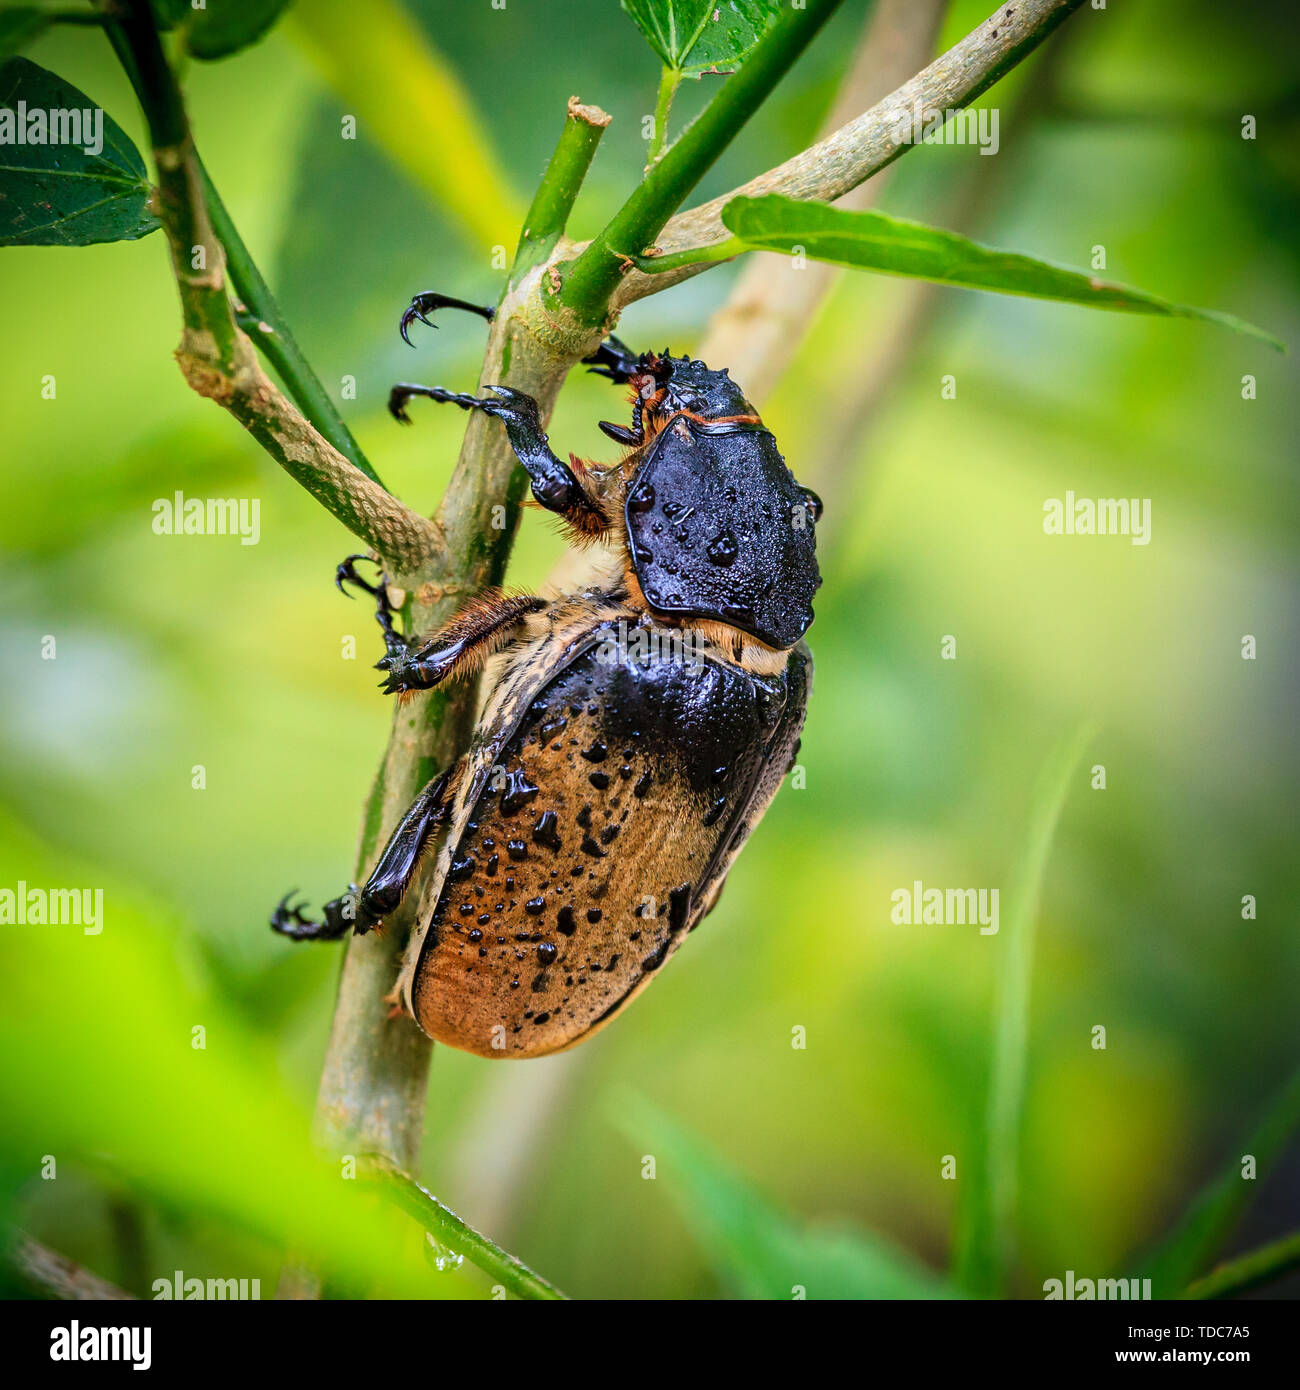 Close-up image of a female Rhinoceros Beetle in tropical forest in Costa Rica Stock Photo